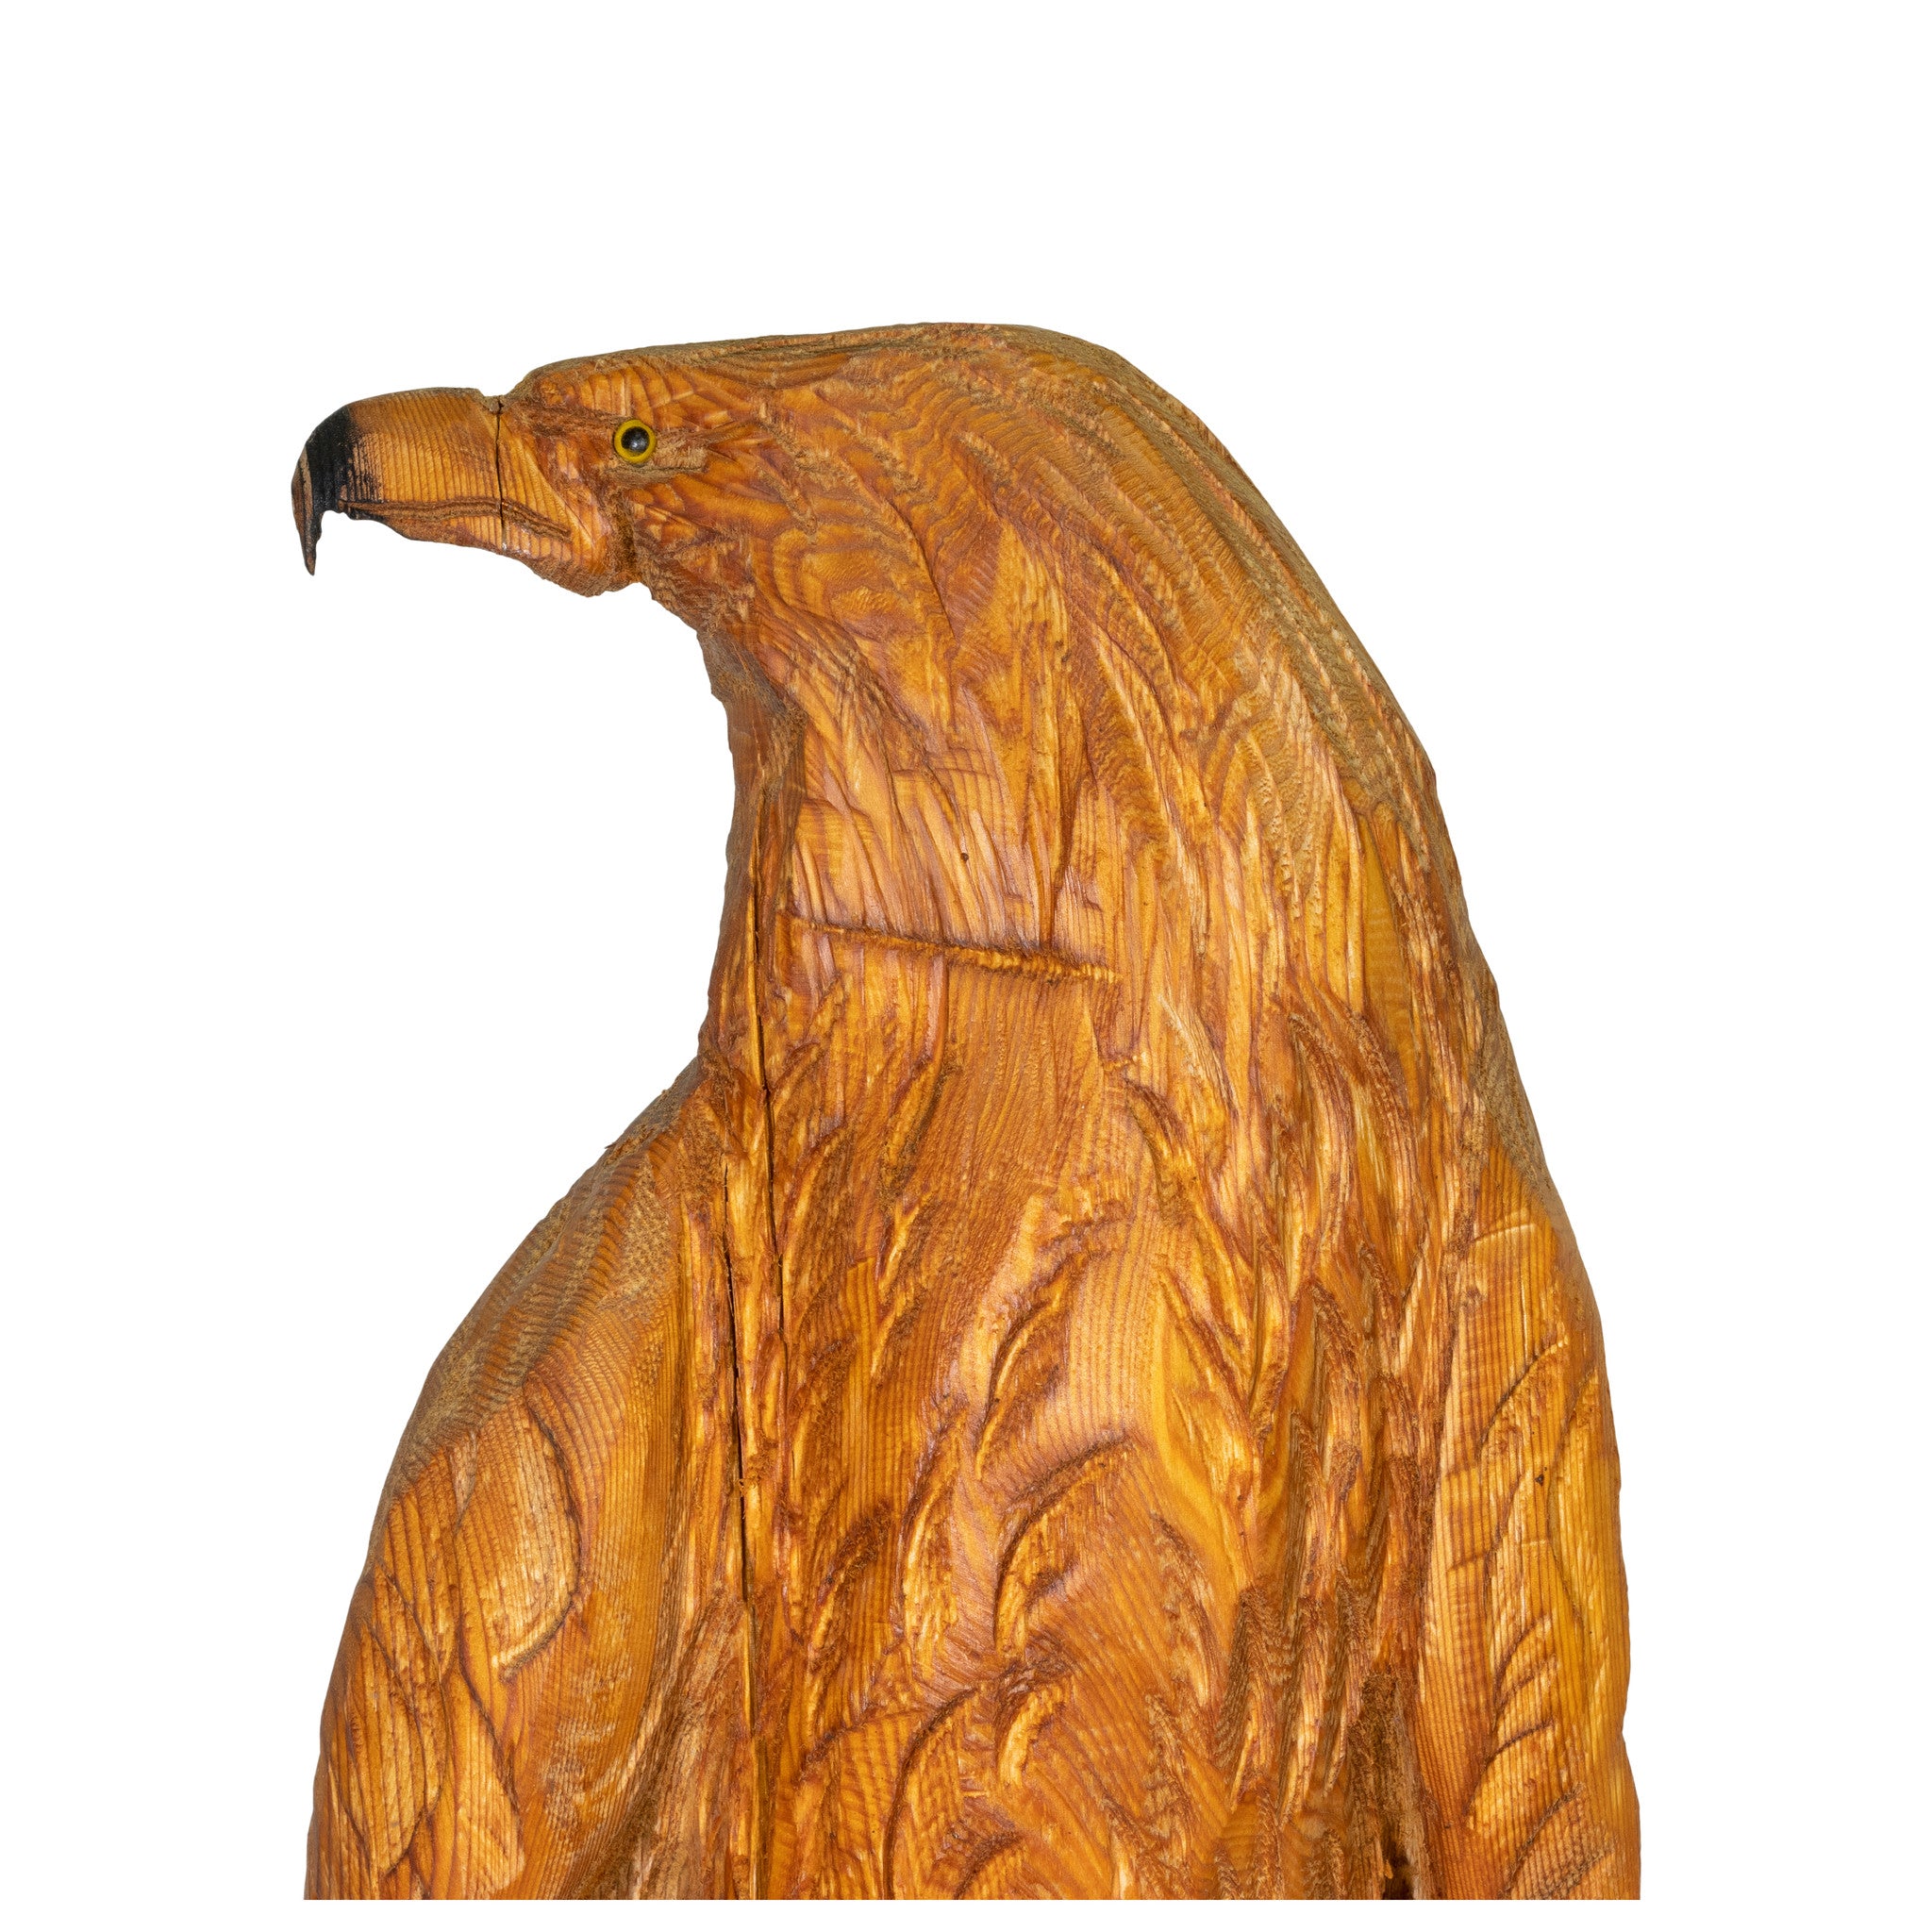 Eagle with Fish Chainsaw Art